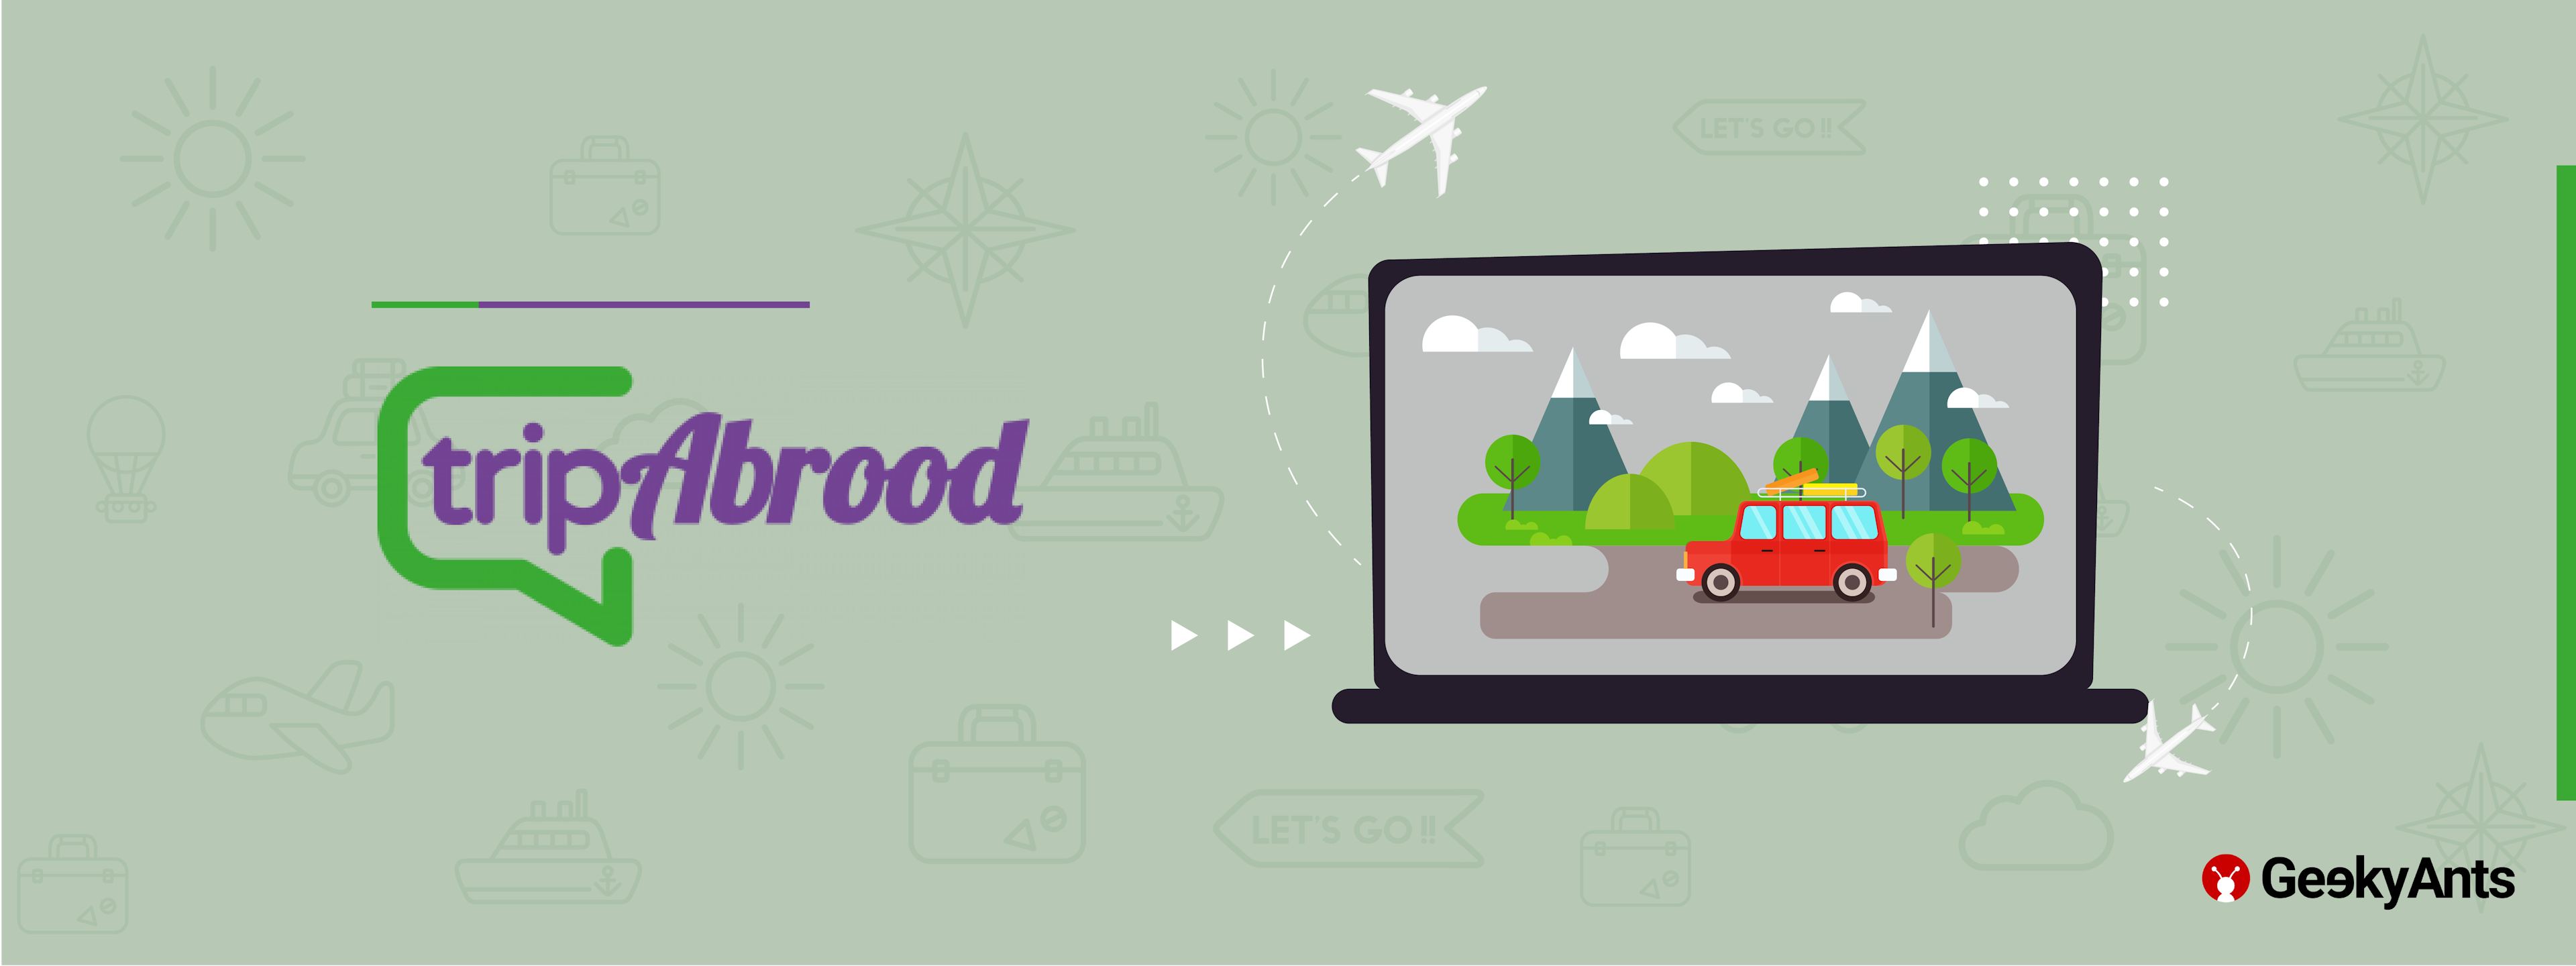 TripAbrood: The Travel App You Never Knew You Needed